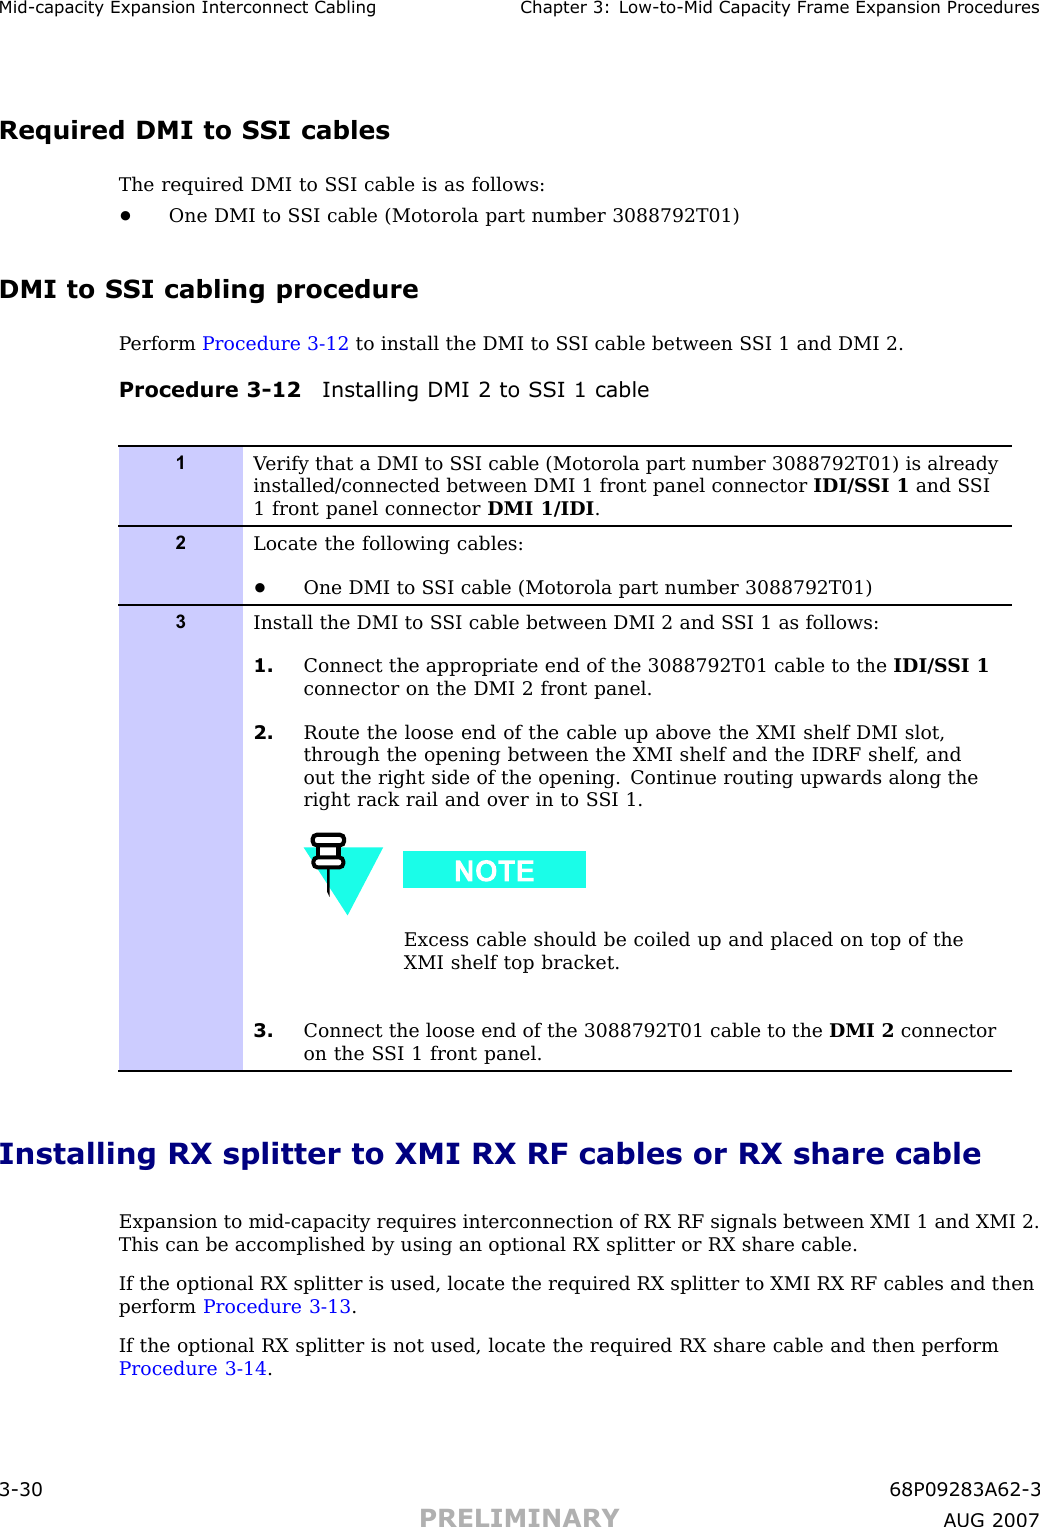 Mid -capacit y Expansion Interconnect Cabling Chapter 3: Low -to -Mid Capacit y Fr ame Expansion ProceduresRequired DMI to SSI cablesThe required DMI to S SI cable is as follows:•One DMI to S SI cable (Motorola part number 3088792T01)DMI to SSI cabling procedureP erform Procedure 3 -12 to install the DMI to S SI cable between S SI 1 and DMI 2.Procedure 3 -12 Installing DMI 2 to S SI 1 cable1V erify that a DMI to S SI cable (Motorola part number 3088792T01) is alreadyinstalled/connected between DMI 1 front panel connector IDI/S SI 1 and S SI1 front panel connector DMI 1/IDI .2Locate the following cables:•One DMI to S SI cable (Motorola part number 3088792T01)3Install the DMI to S SI cable between DMI 2 and S SI 1 as follows:1. Connect the appropriate end of the 3088792T01 cable to the IDI/S SI 1connector on the DMI 2 front panel.2. Route the loose end of the cable up above the XMI shelf DMI slot,through the opening between the XMI shelf and the IDRF shelf , andout the right side of the opening. Continue routing upwards along theright rack rail and over in to S SI 1.Excess cable should be coiled up and placed on top of theXMI shelf top bracket.3. Connect the loose end of the 3088792T01 cable to the DMI 2 connectoron the S SI 1 front panel.Installing RX splitter to XMI RX RF cables or RX share cableExpansion to mid -capacity requires interconnection of RX RF signals between XMI 1 and XMI 2.This can be accomplished by using an optional RX splitter or RX share cable.If the optional RX splitter is used, locate the required RX splitter to XMI RX RF cables and thenperform Procedure 3 -13 .If the optional RX splitter is not used, locate the required RX share cable and then performProcedure 3 -14 .3 -30 68P09283A62 -3PRELIMINARY A UG 2007